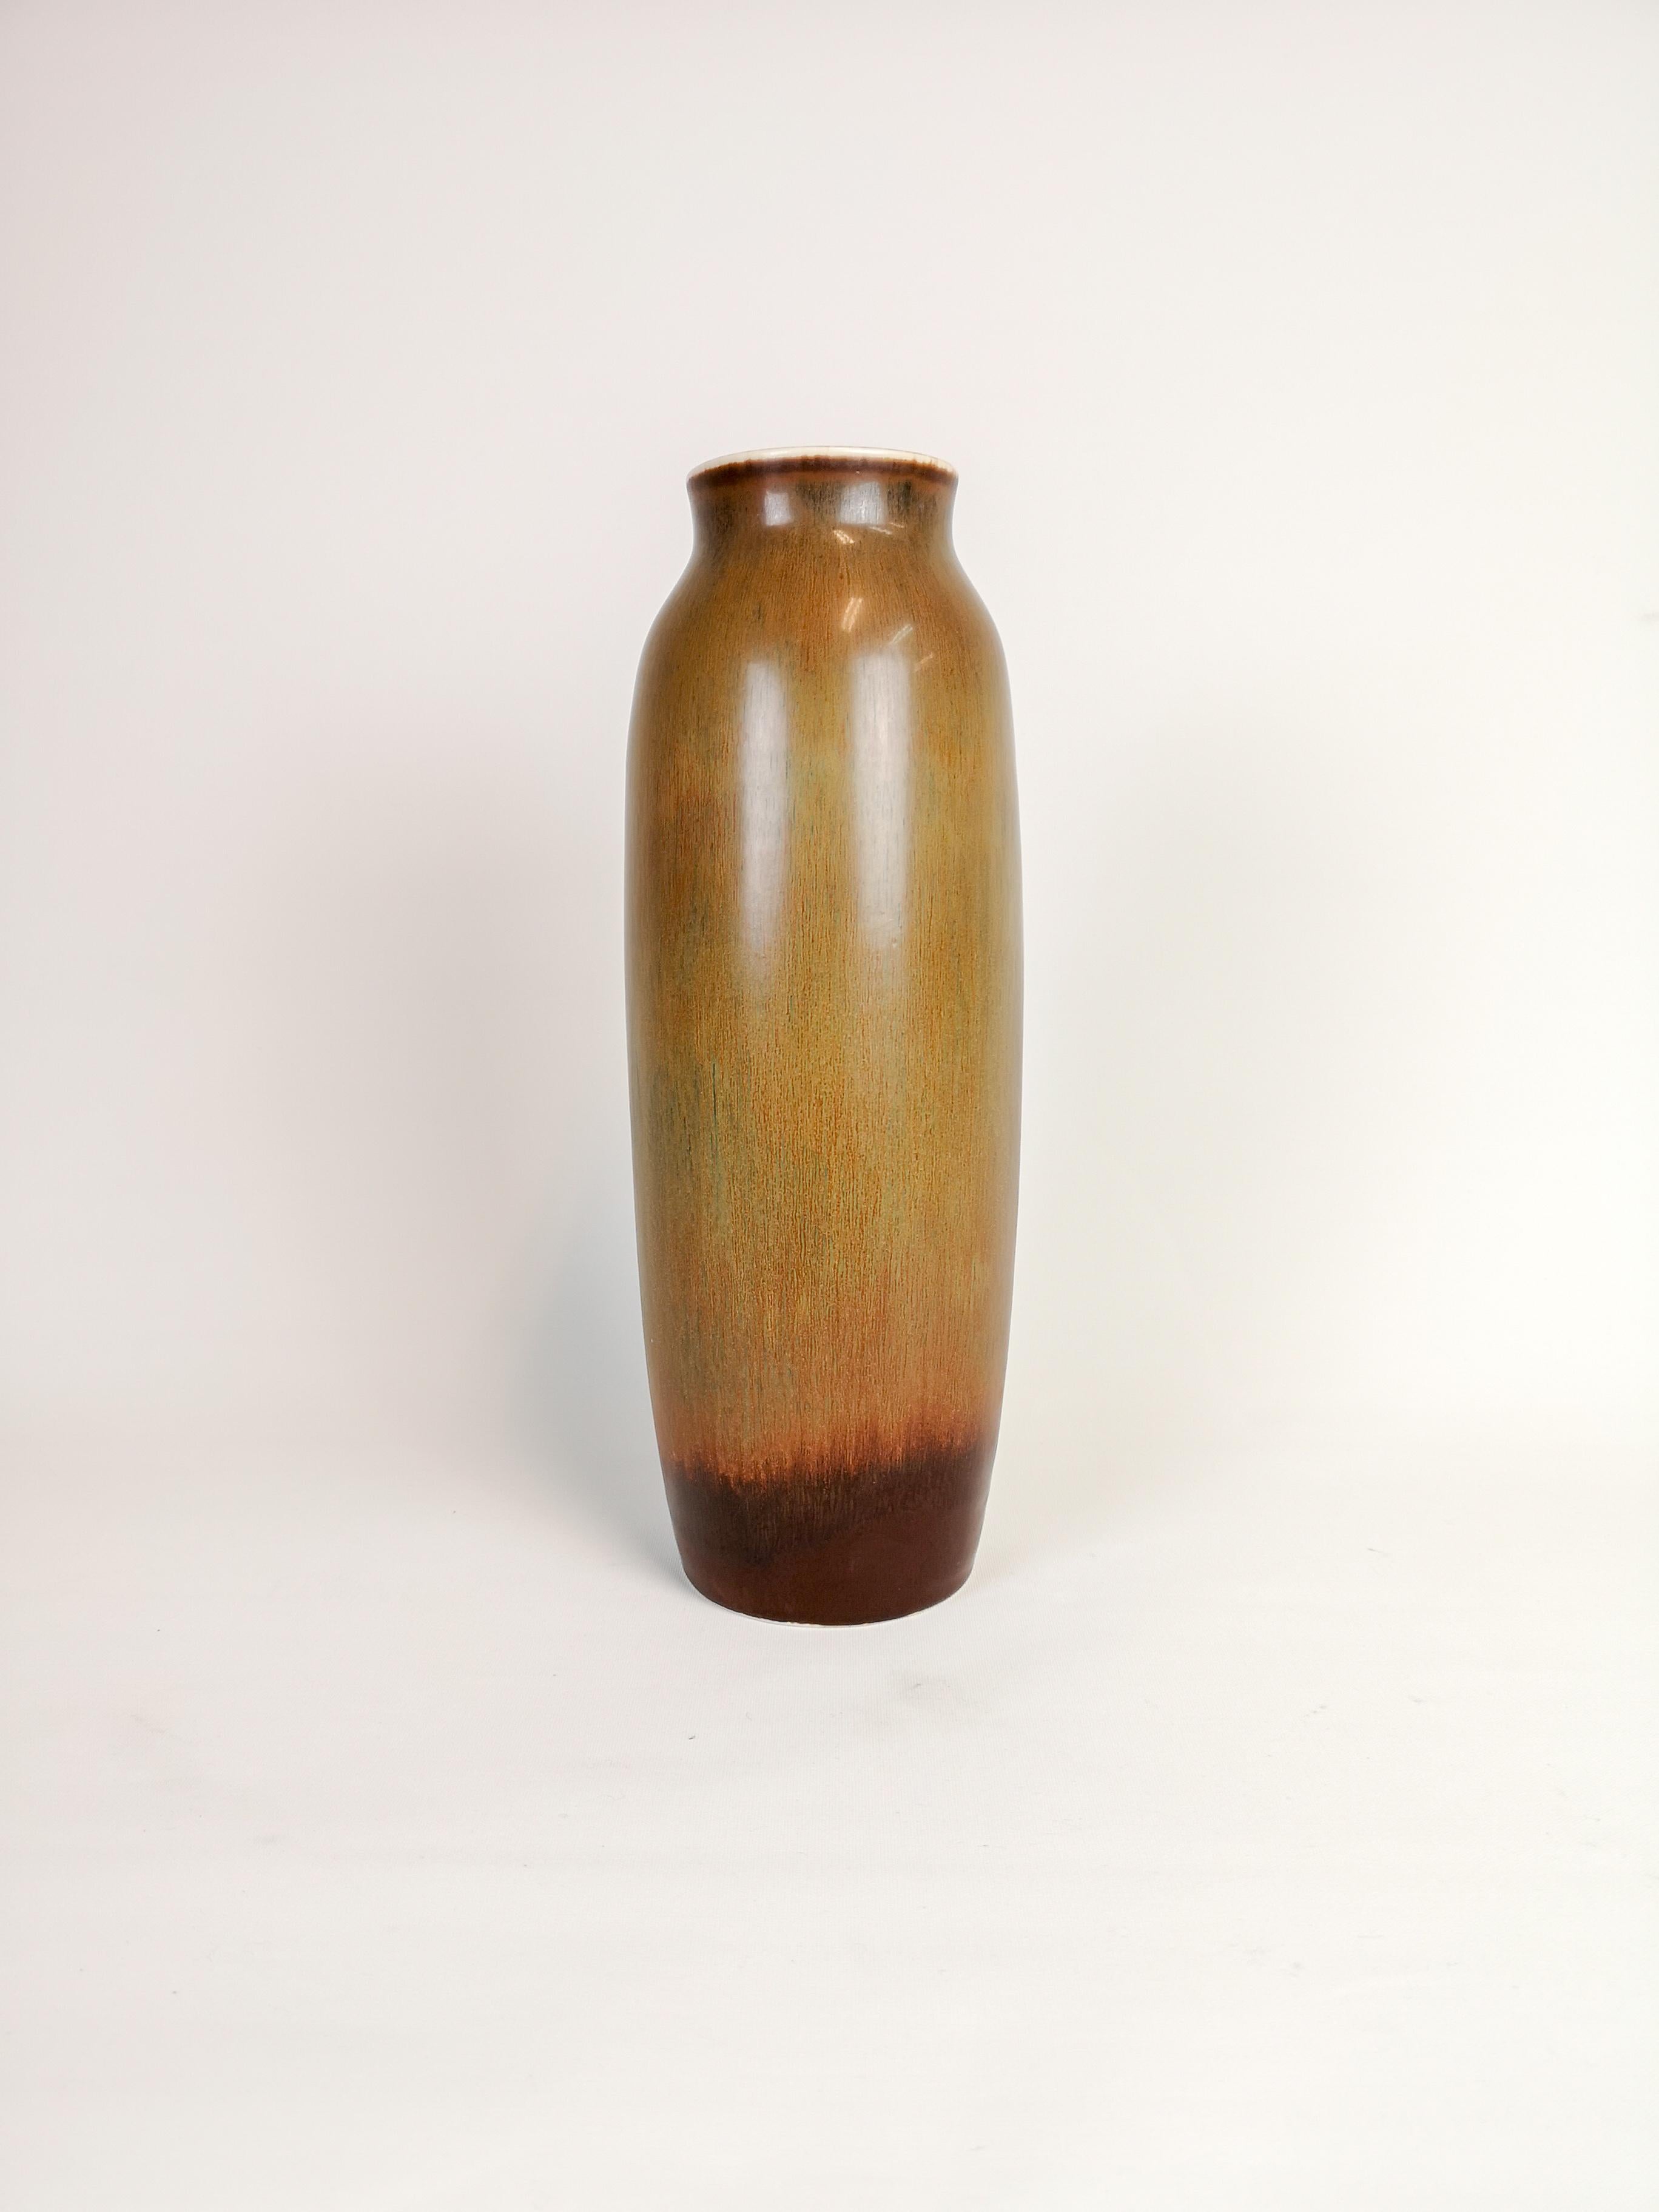 This wonderful sculptured vase with its intense harfur glaze, which shifts in different colors. The vase made by Rörstrand Sweden and designed by Carl-Harry Stålhane. 

Very good condition.

Measures: H 31 cm, W 11 cm.
  